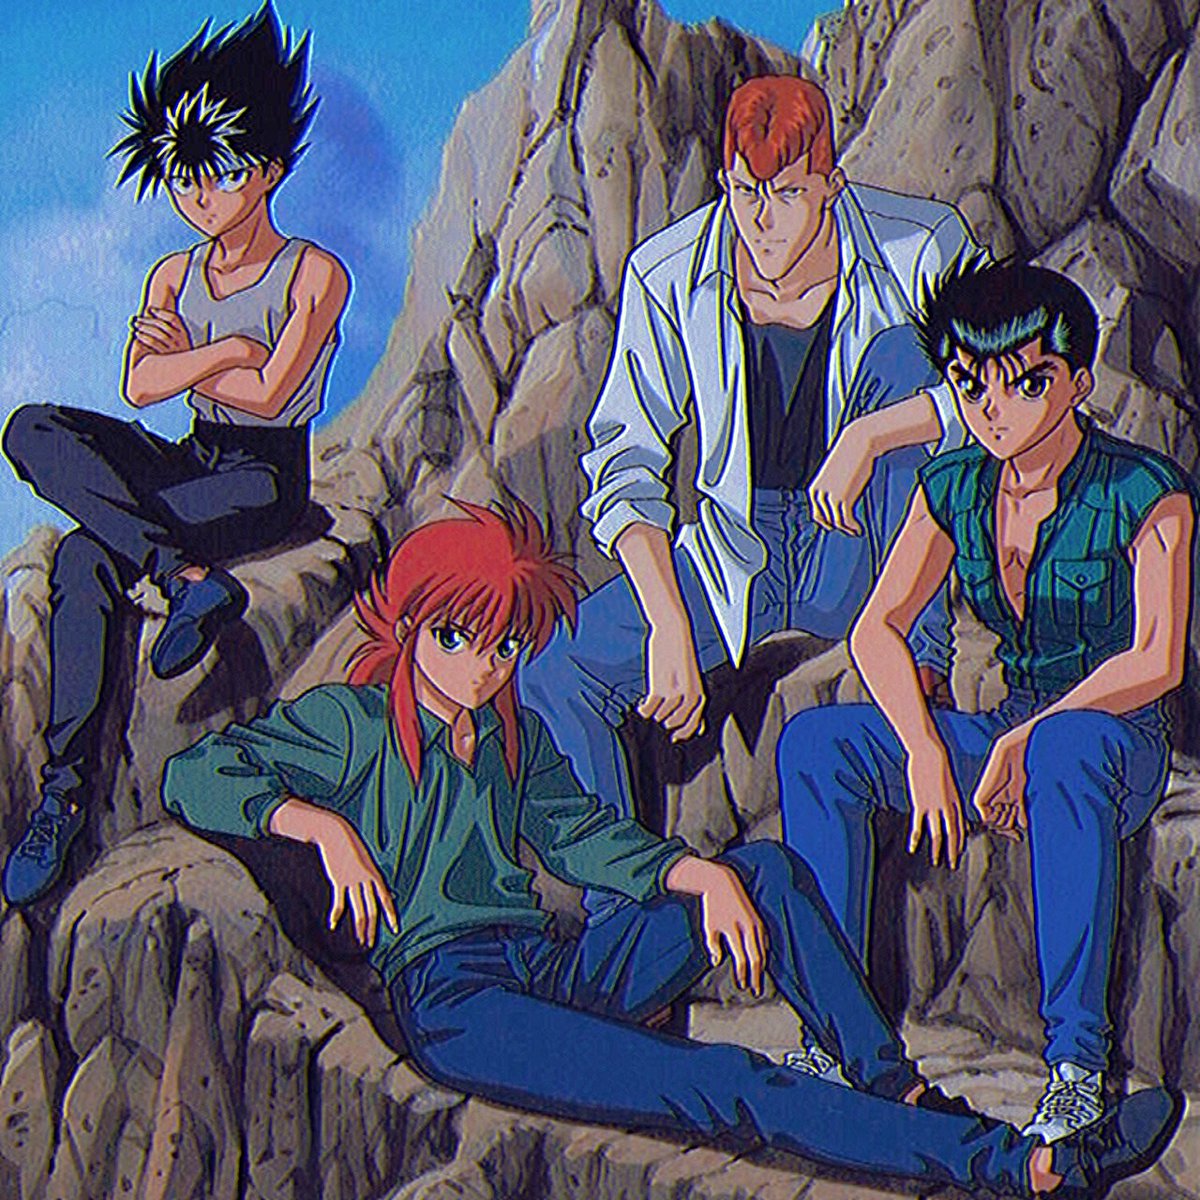 Yuki  Netflix's YYH, OP S2 and AIB S3 on X: I'm currently reading Tokyo  Revengers manga and legitly love this. Every characters are adorable. It's  a story about friendship and bond